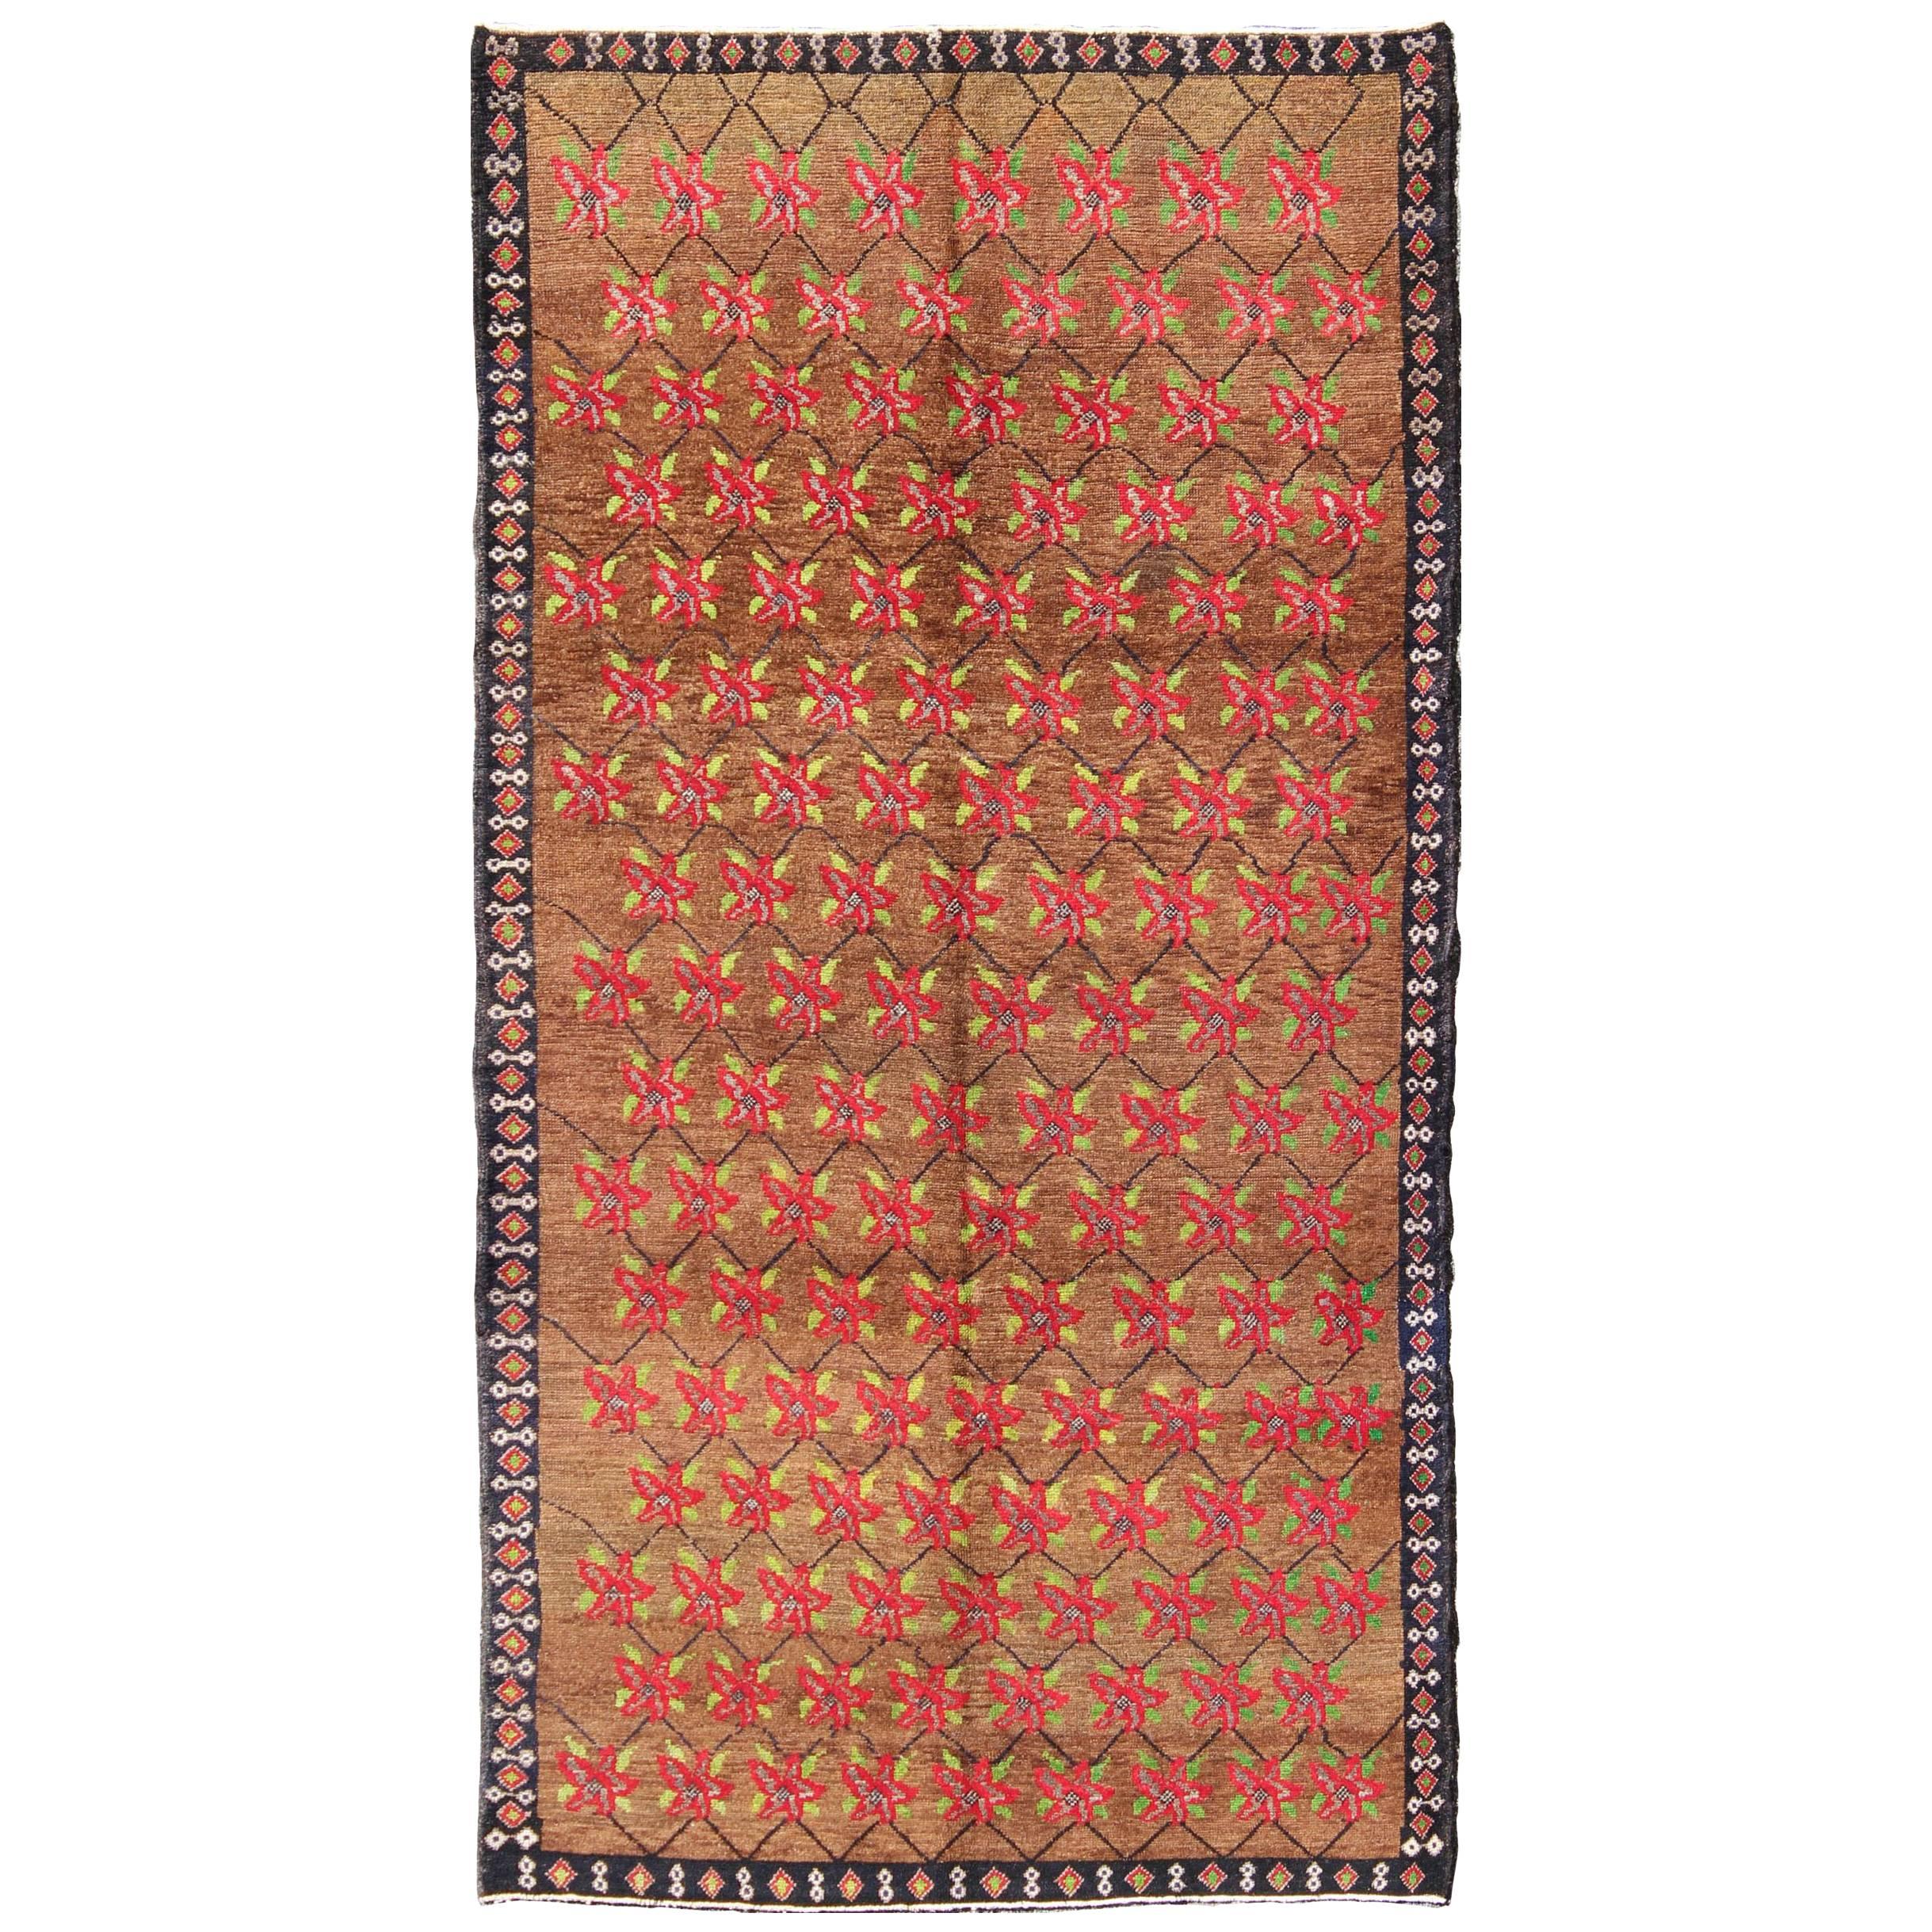 Turkish Oushak Carpet with Poinsettia Design With A Light Brown Background